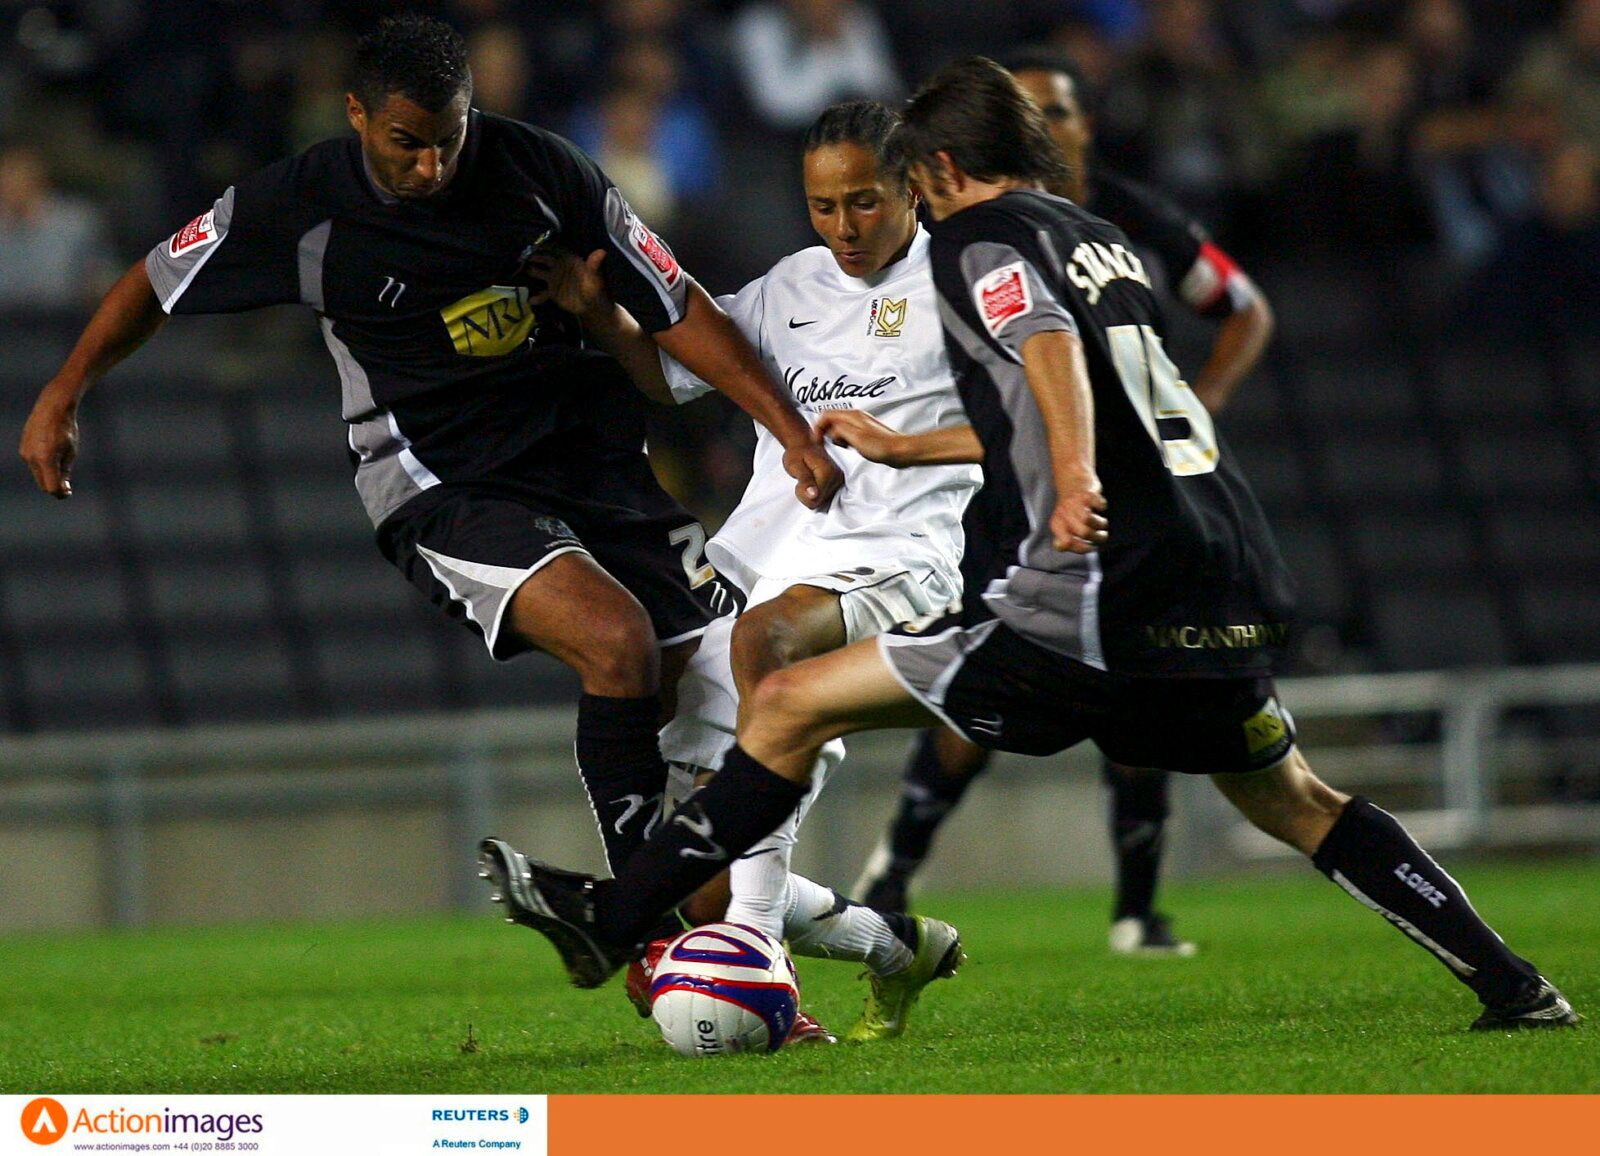 Football - Milton Keynes Dons v Peterborough United Johnstone's Paint Trophy Southern Section Second Round  - Stadium MK - 9/10/07 
Peterborough's Rene Howe (L) and Gavin Strachan (R) in action against MK Dons' Bally Smart (C) 
Mandatory Credit: Action Images / Andrew Boyers 
Livepic